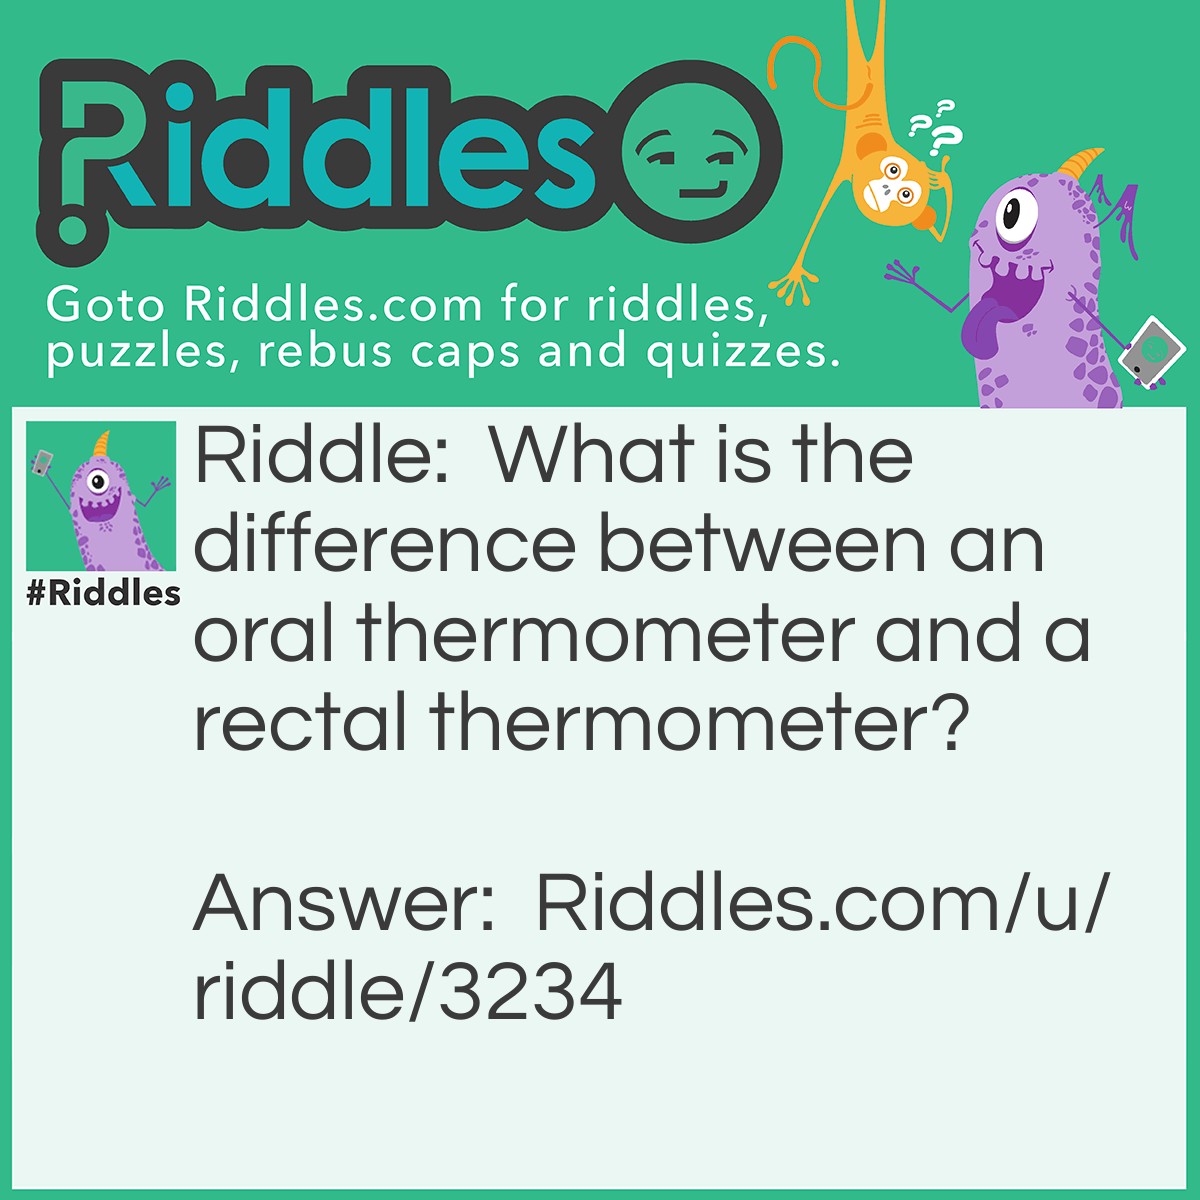 Riddle: What is the difference between an oral thermometer and a rectal thermometer? Answer: The taste